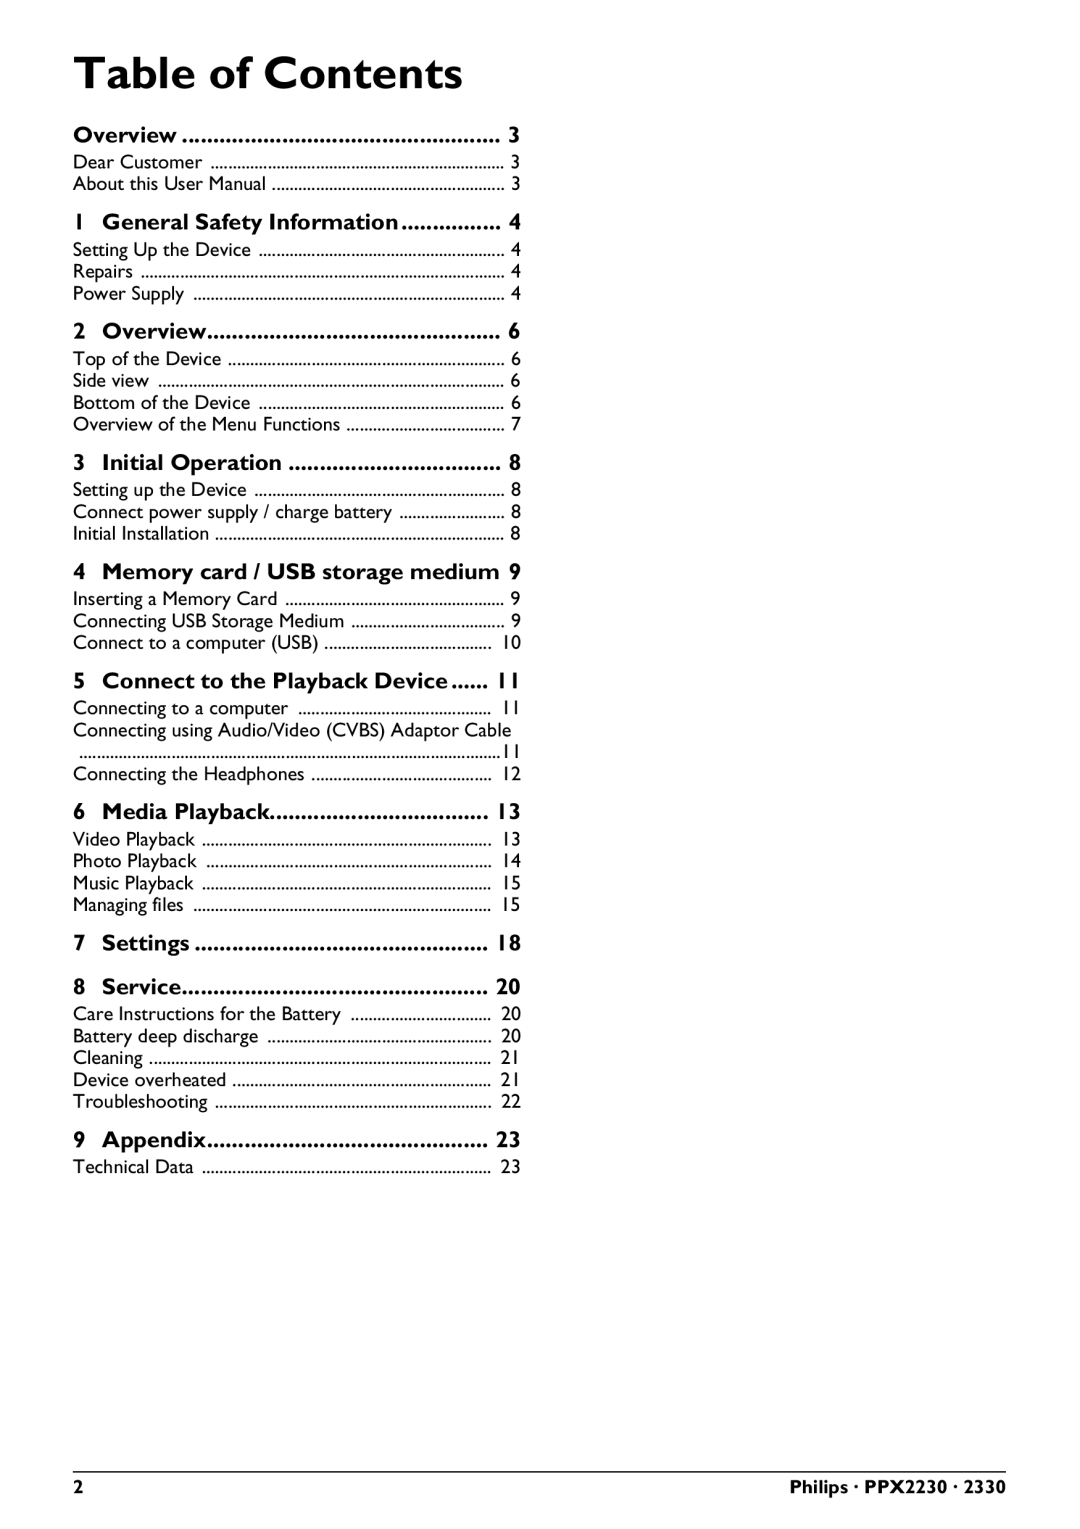 Philips PPX2330 user manual Table of Contents, Philips · PPX2230 · 